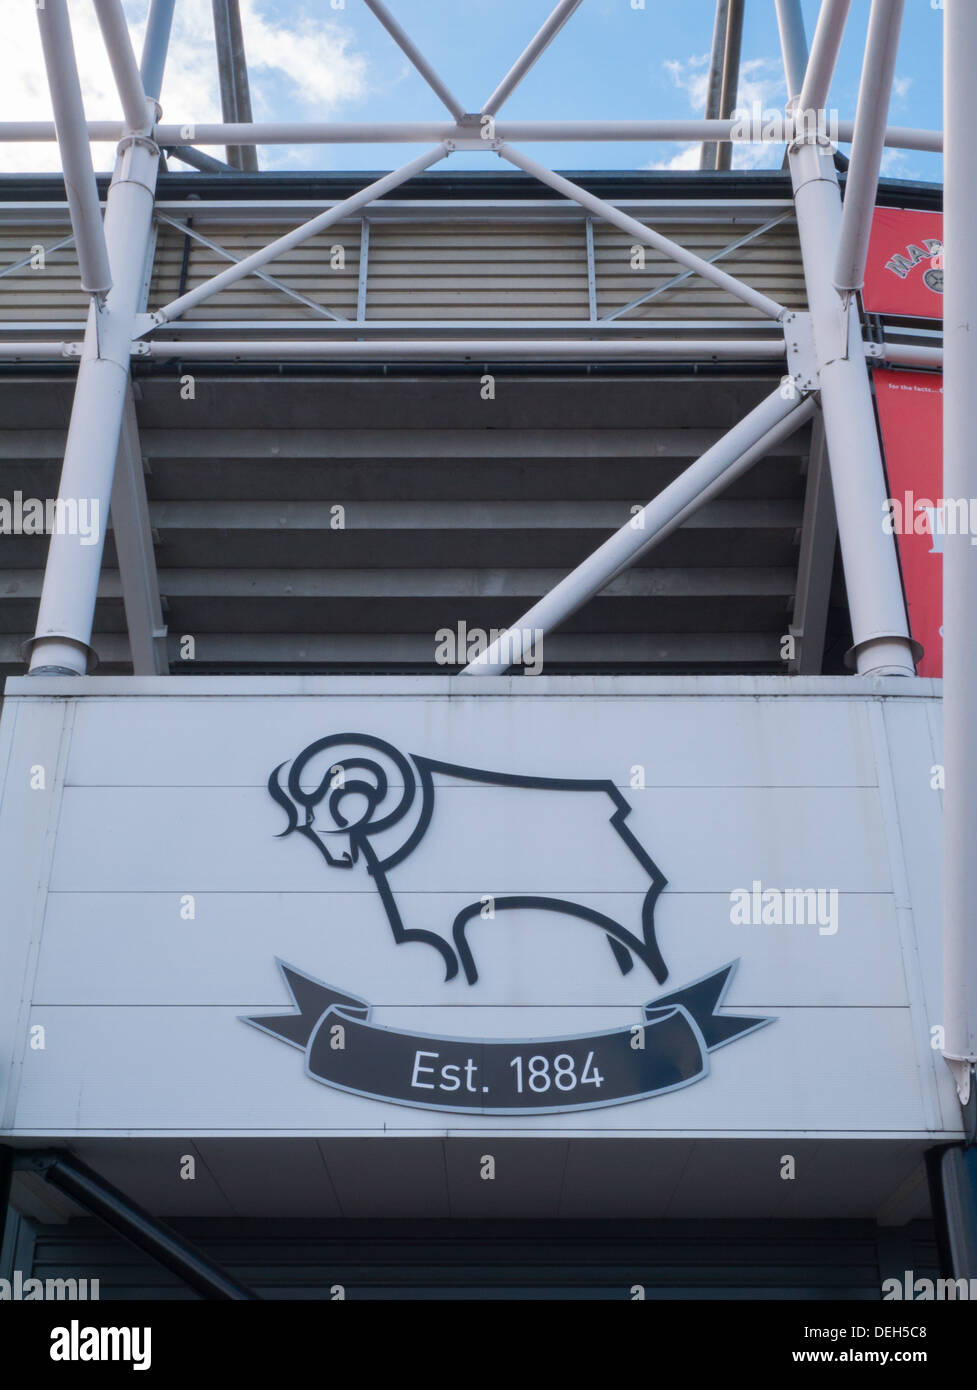 Derby Football Stadium. The home of Derby County Football Club (The Rams). Stock Photo